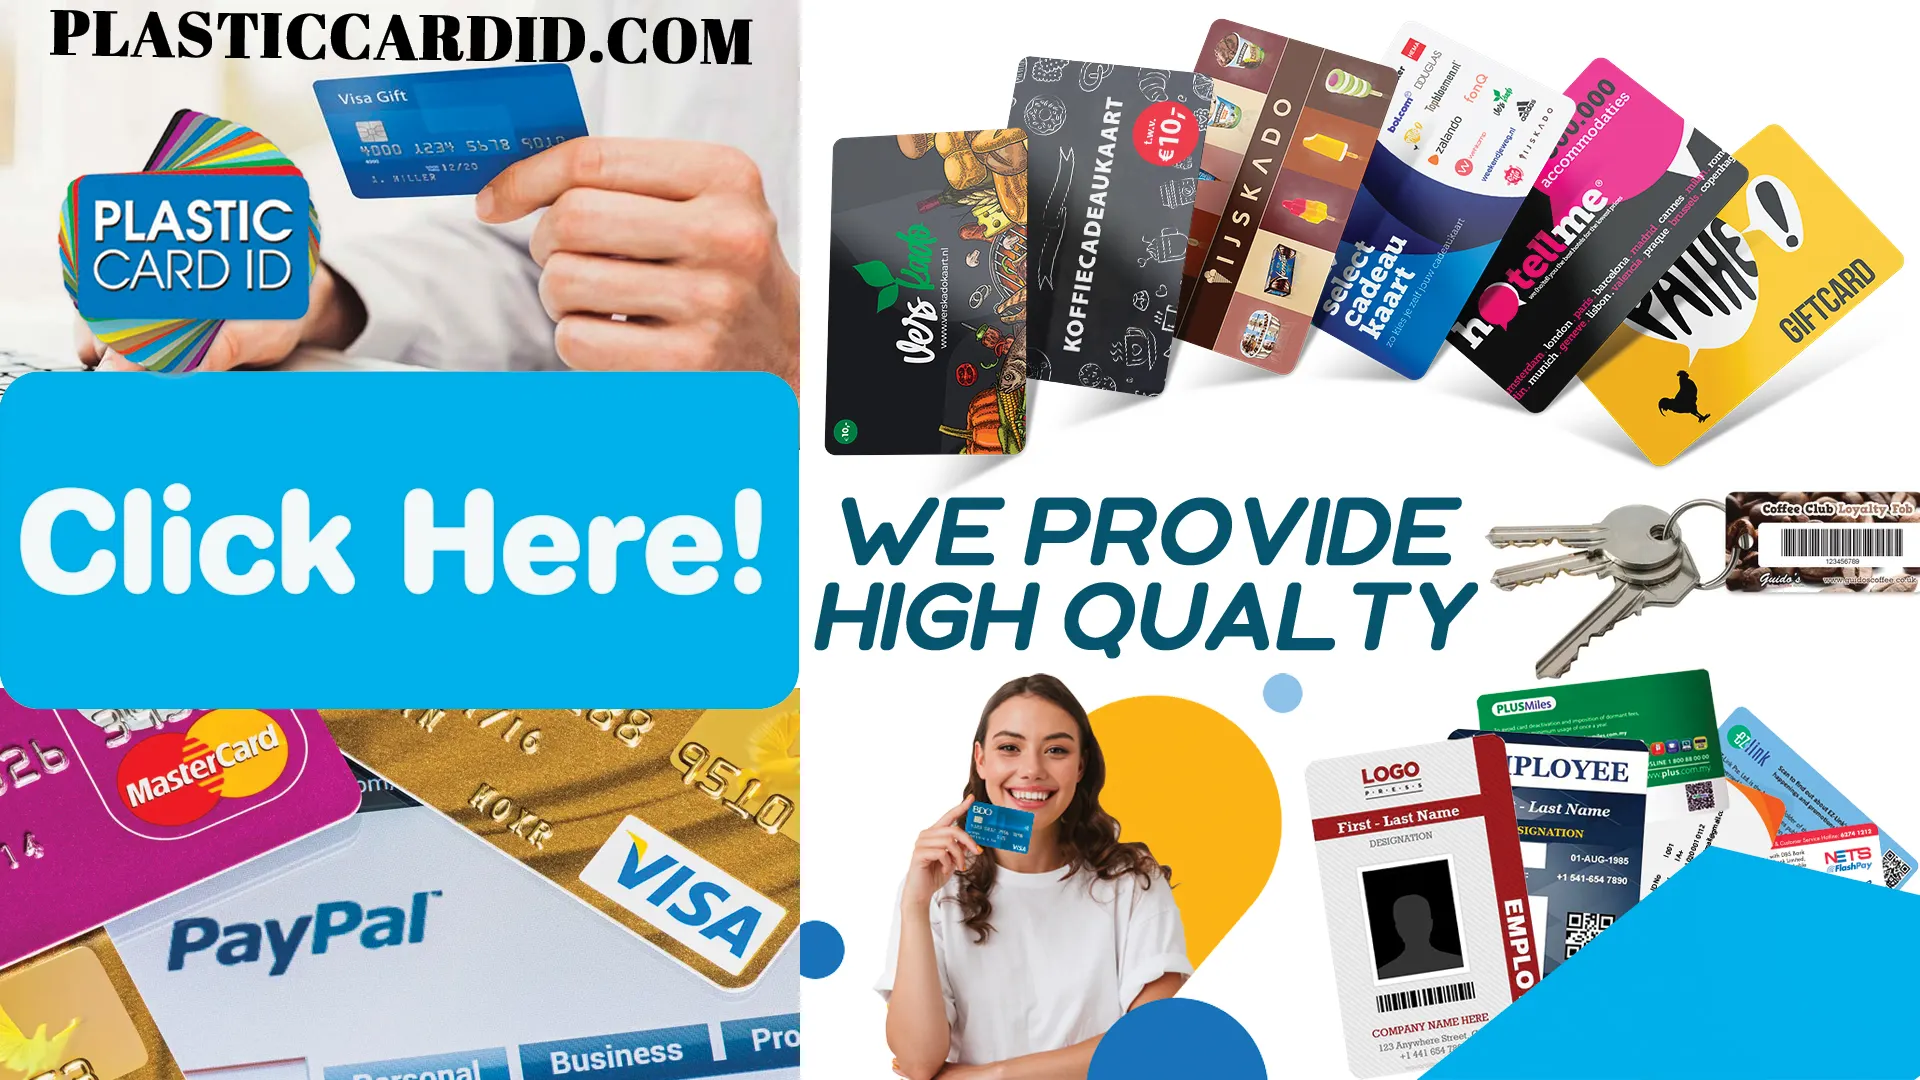 Cultivating Customer Loyalty with Expertly Crafted Plastic Cards